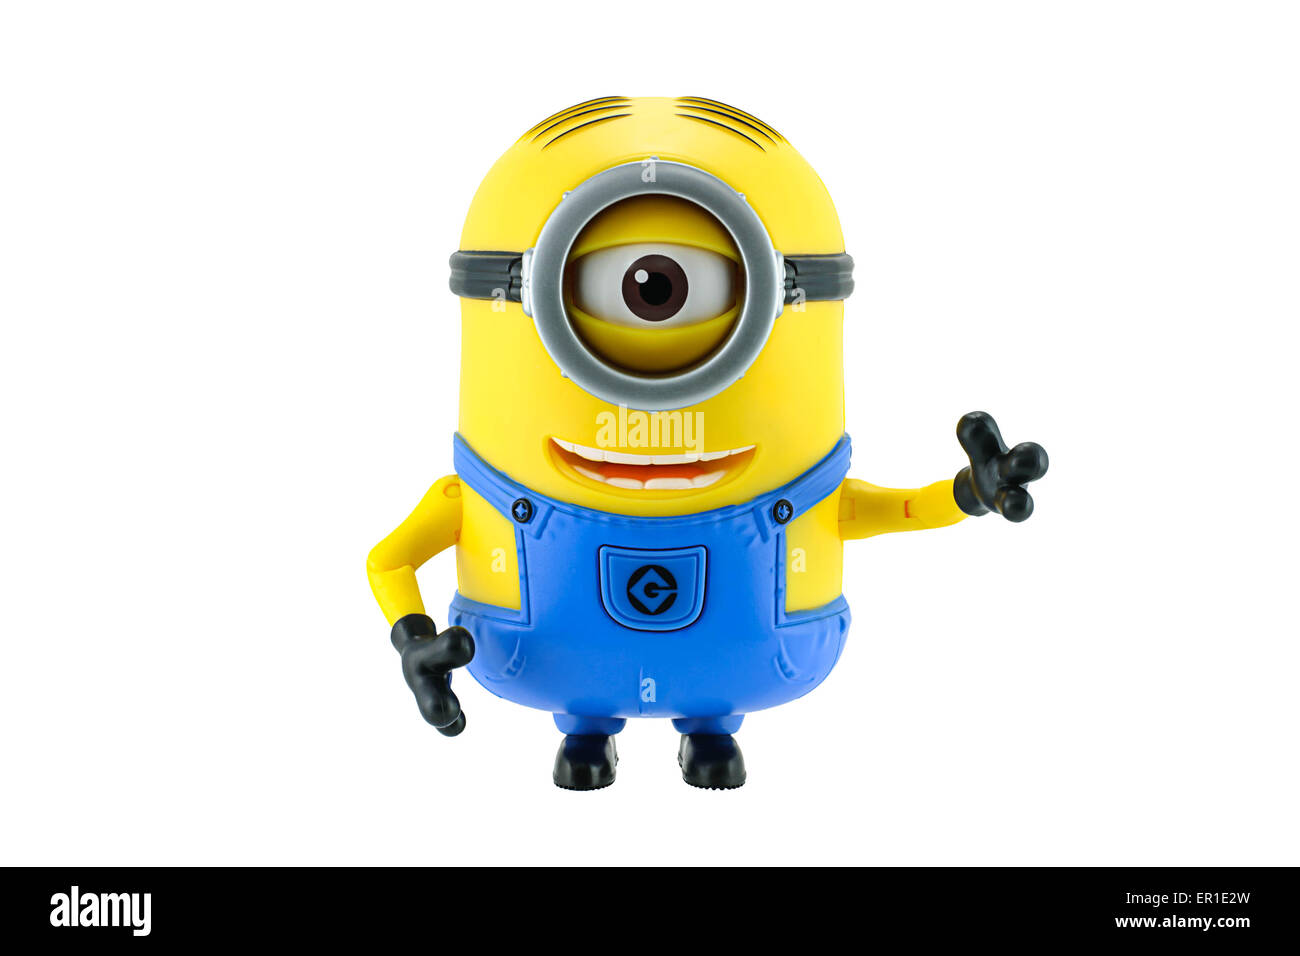 3D eyes Despicable Me Minion Plush Backpack Child PRE School Kid